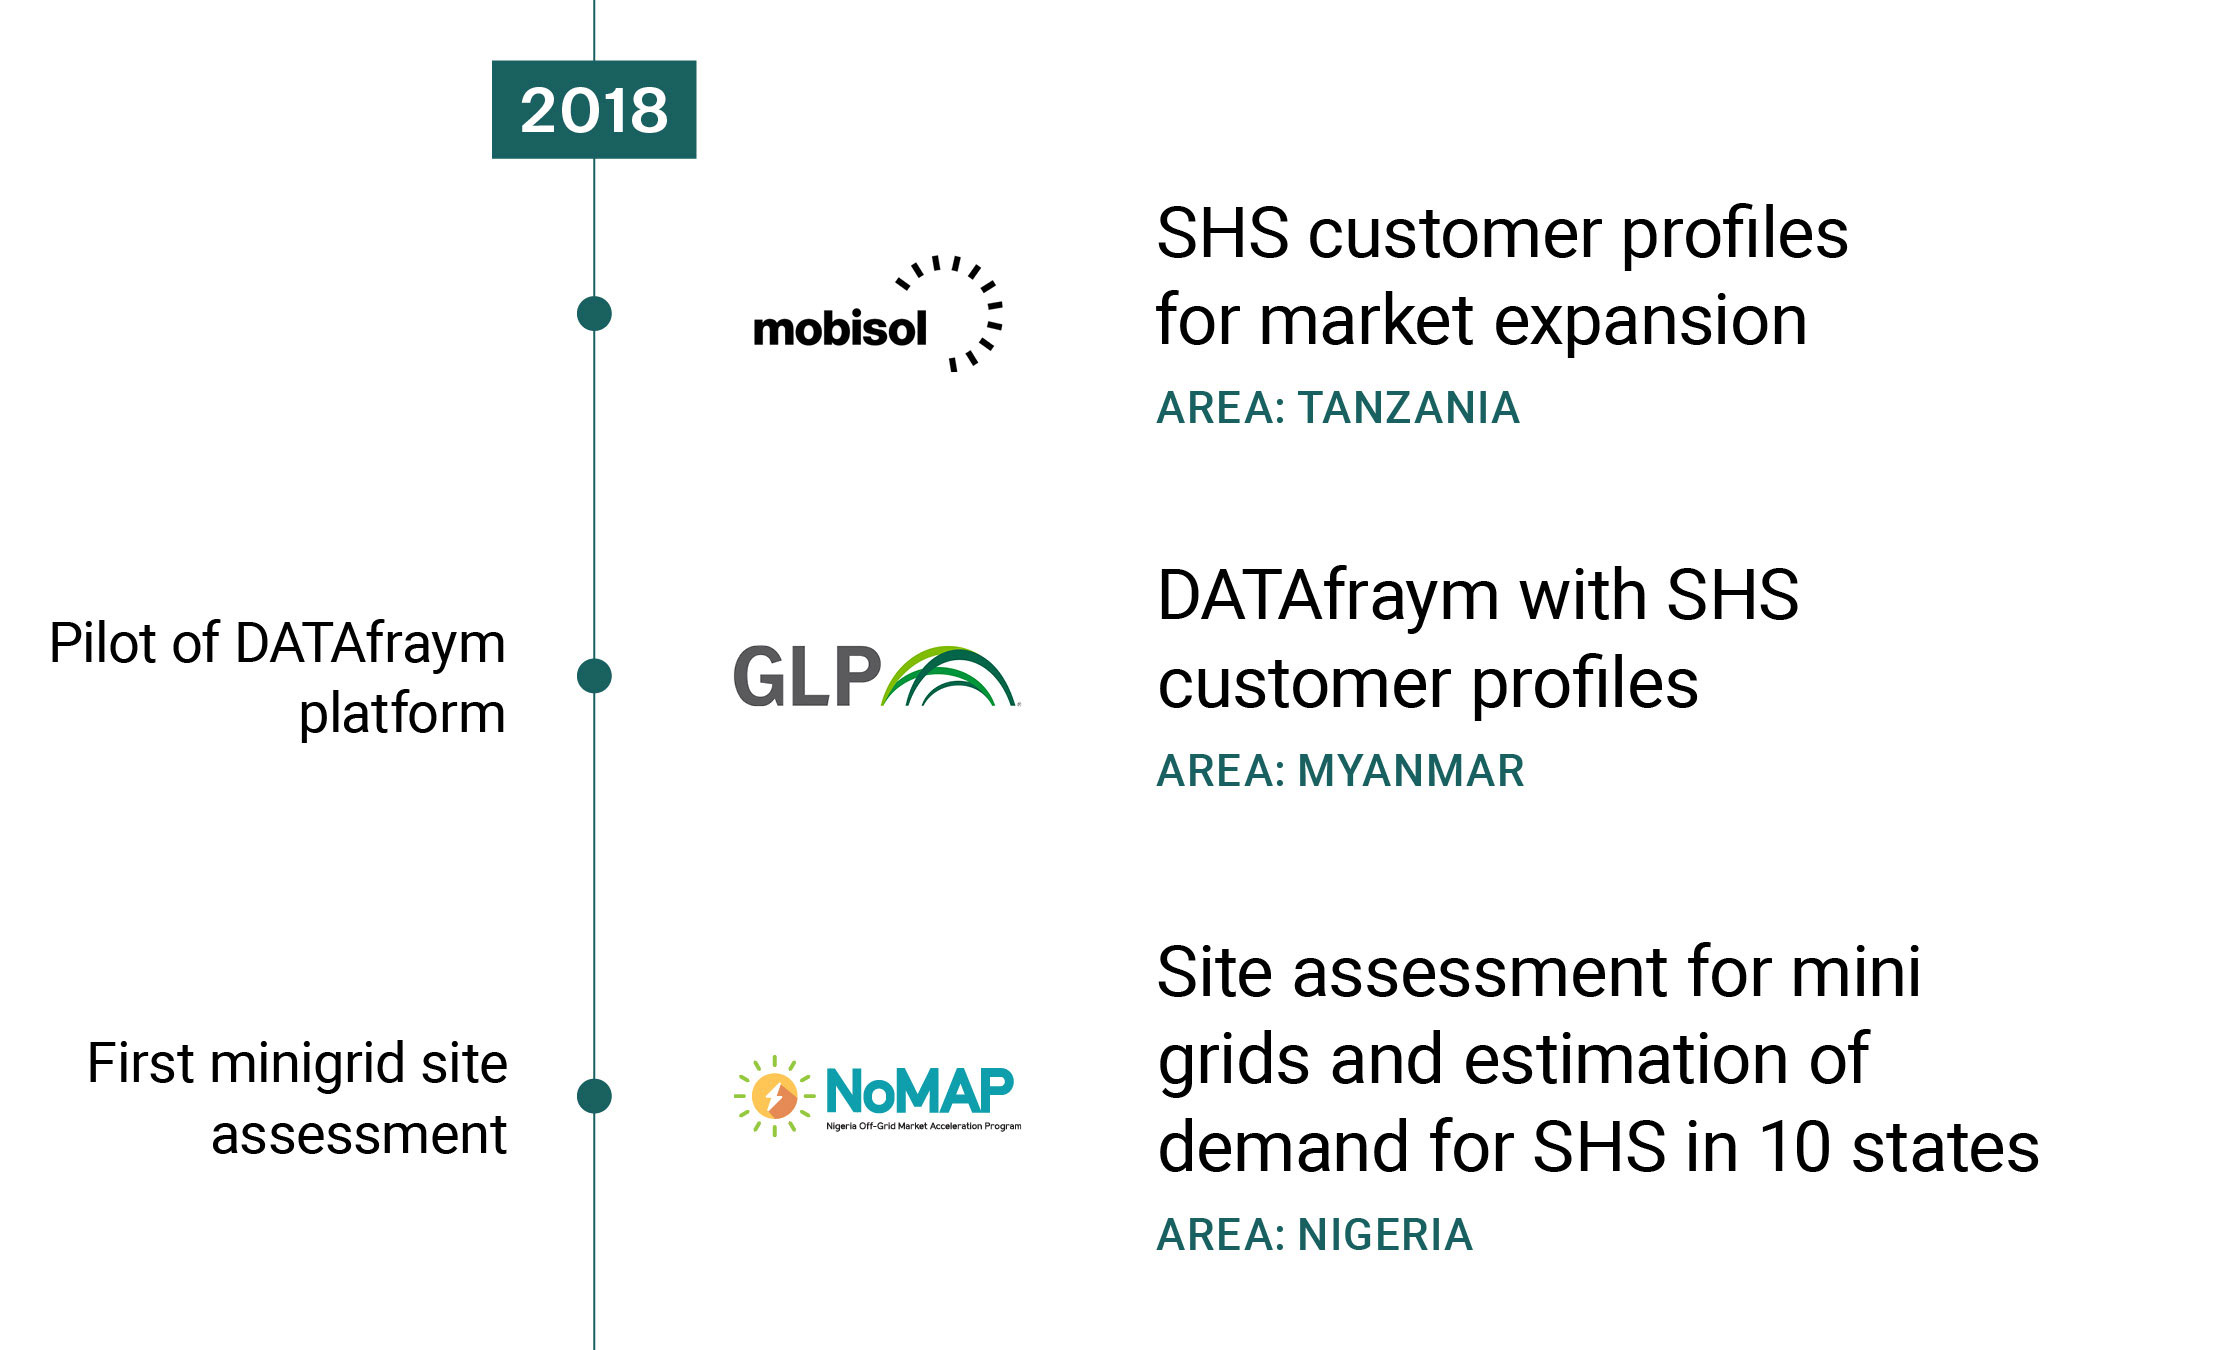 May 2018 SHS customer profiles for market expansion Mobisol Tanzania Tanzania June 2018 DATAfraym with SHS customer profiles GLP Myanmar Pilot of DATAfraym platform October 2018 Site assessment for mini grids and estimation of demand for SHS in 10 states   Nigeria Off-Grid Market Acceleration Program (NOMAP) Nigeria First  minigrid site assessment